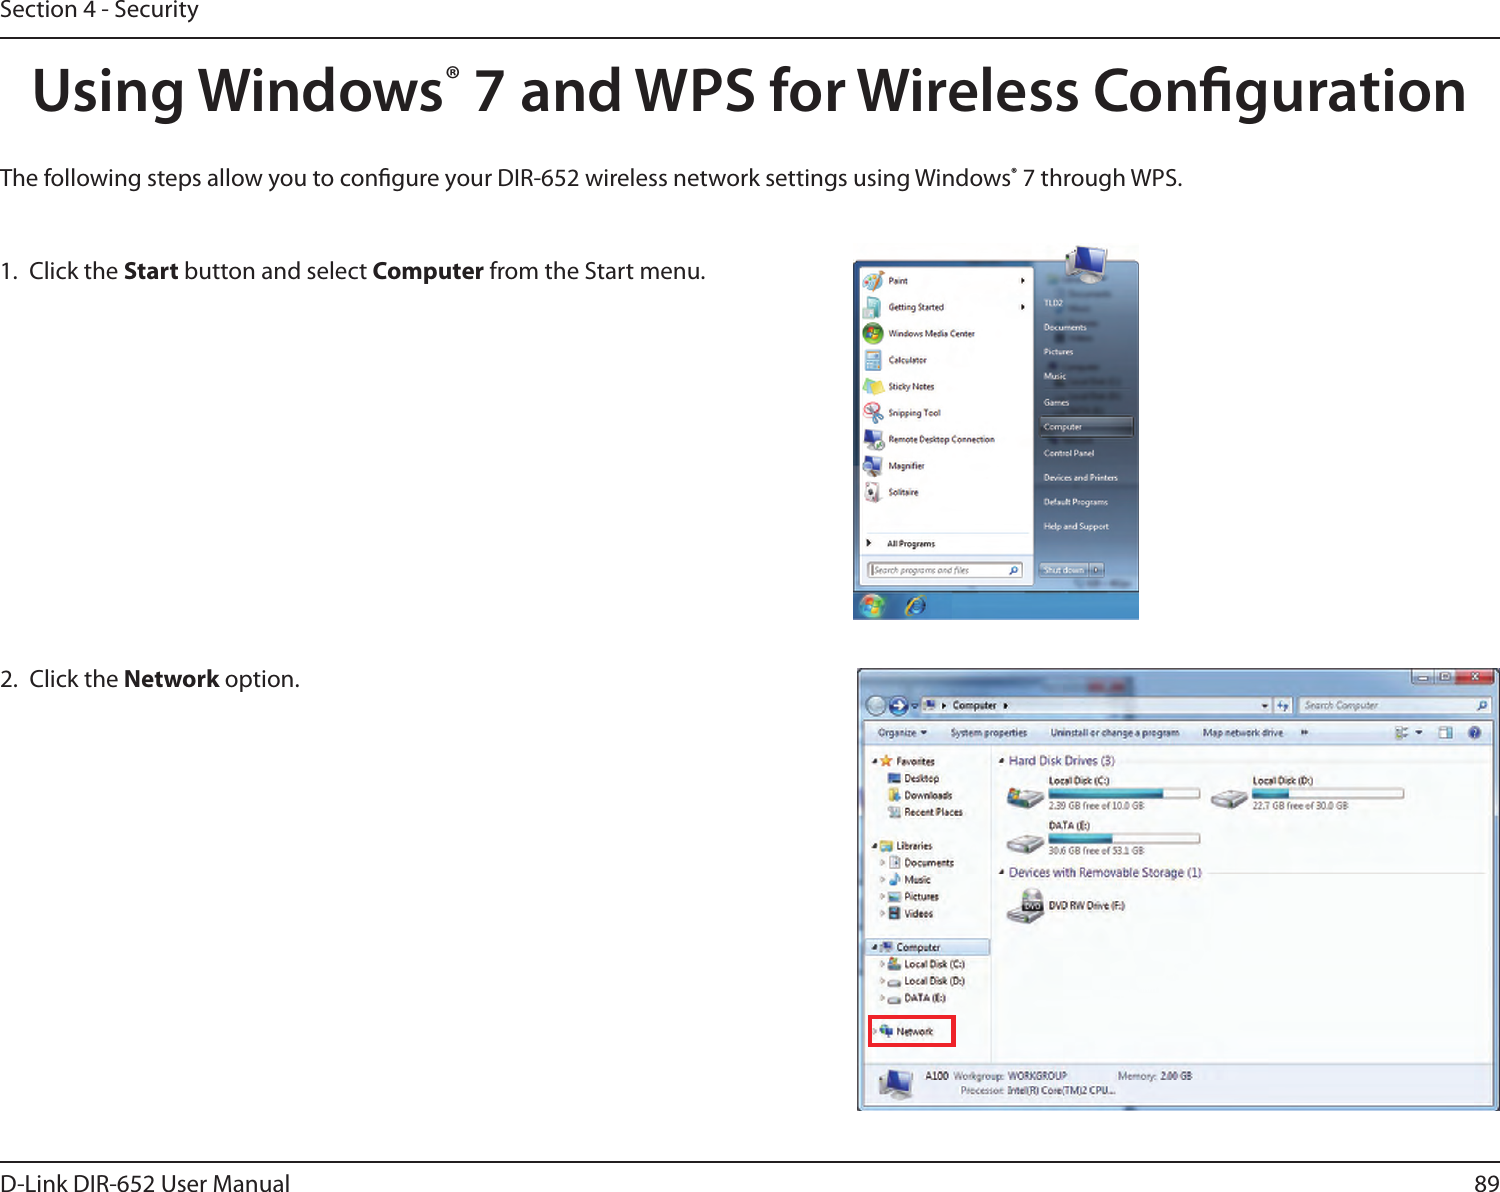 89D-Link DIR-652 User ManualSection 4 - SecurityUsing Windows® 7 and WPS for Wireless CongurationThe following steps allow you to congure your DIR-652 wireless network settings using Windows® 7 through WPS.1.  Click the Start button and select Computer from the Start menu.2.  Click the Network option.